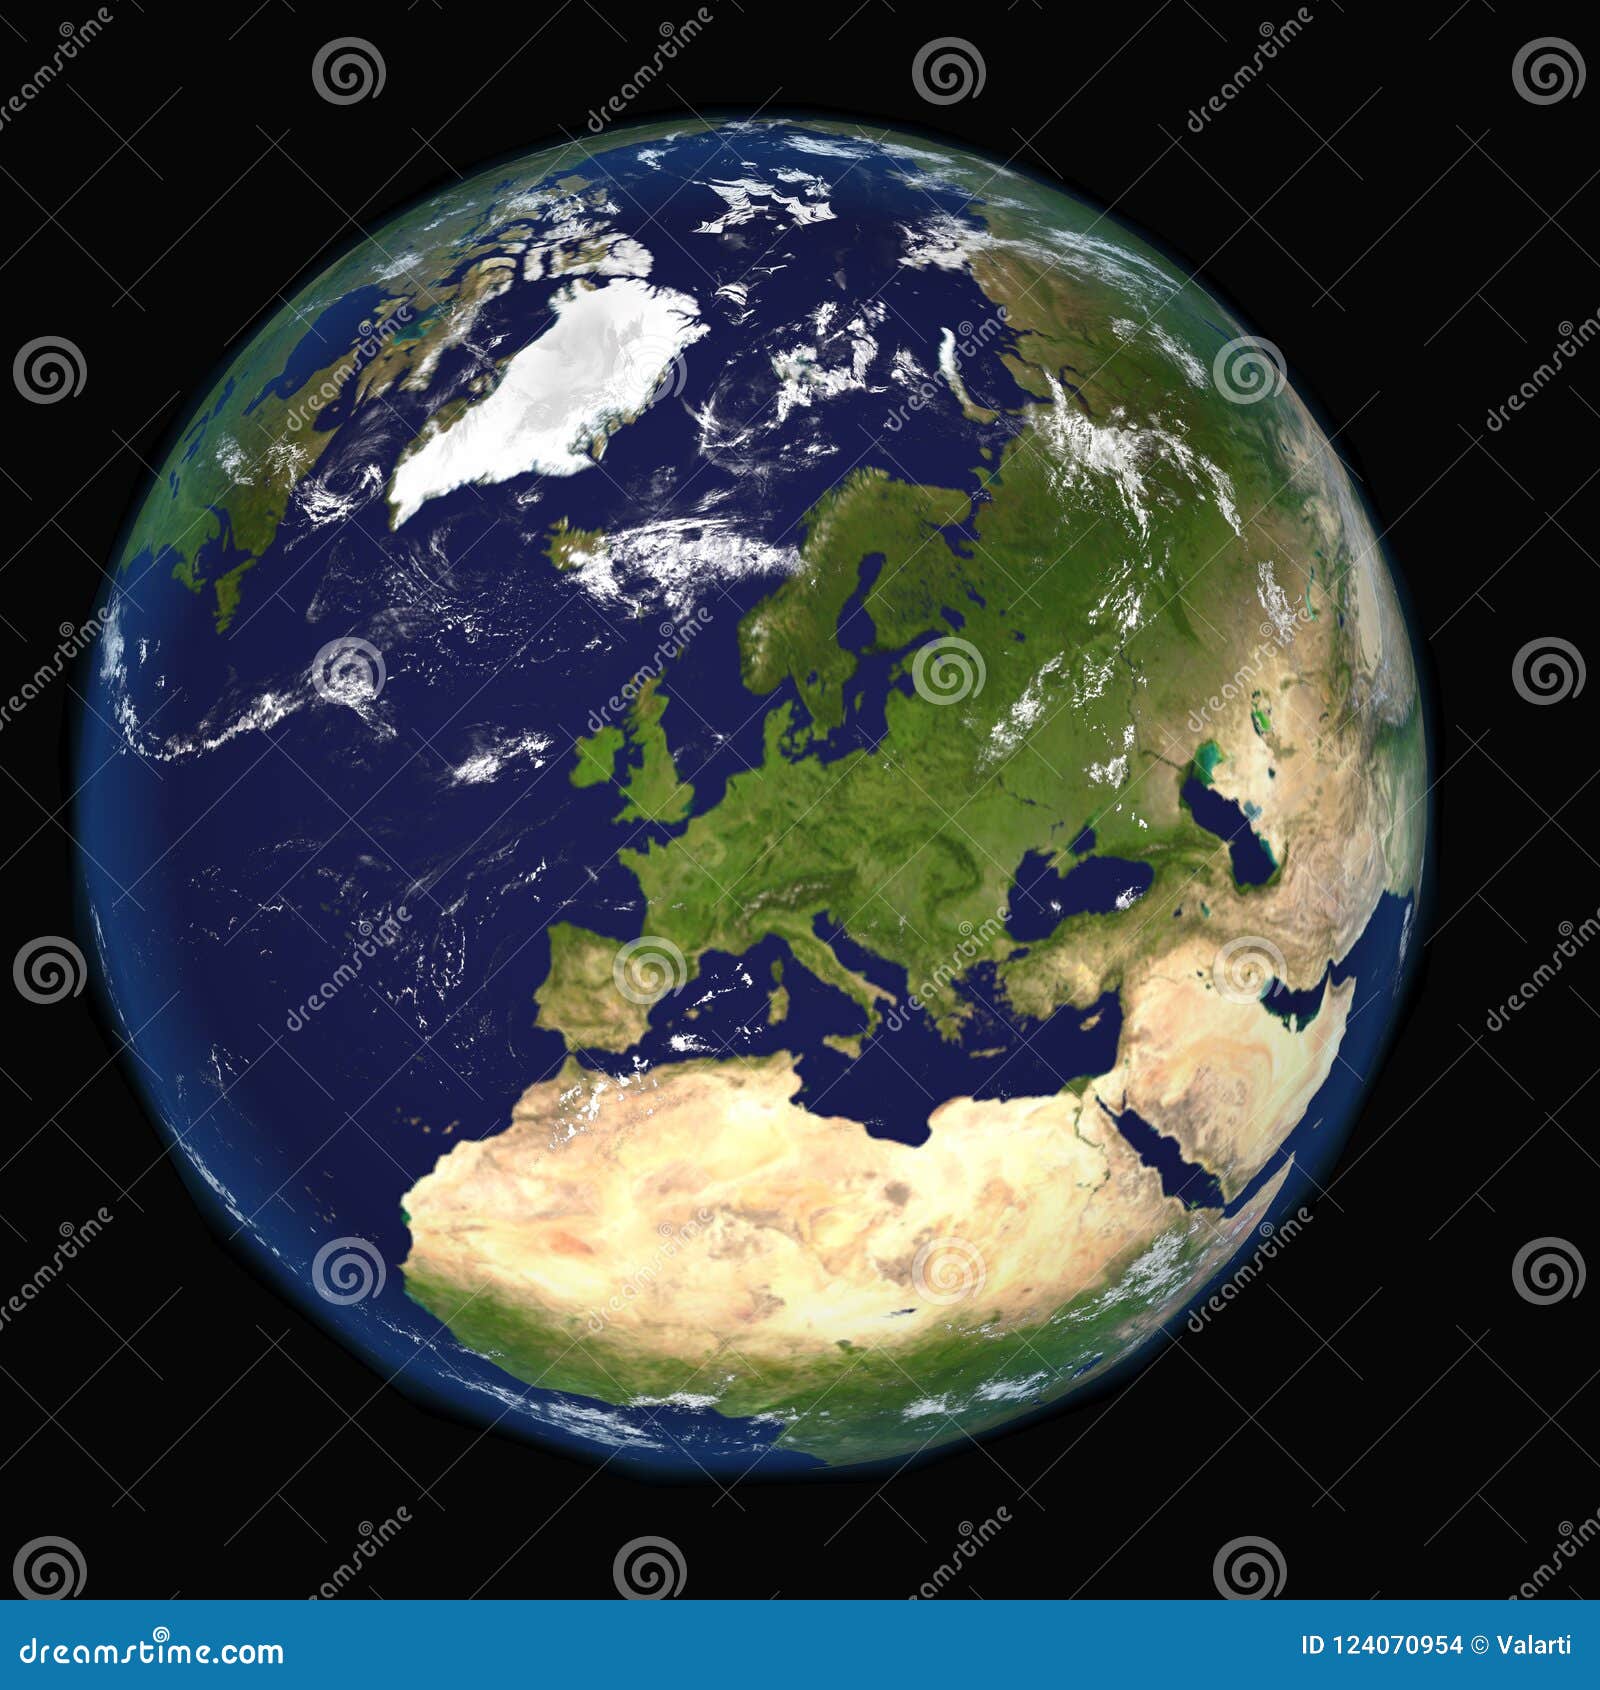 the earth from space showing europe and africa. extremely detailed image, including s furnished by nasa. other orientations